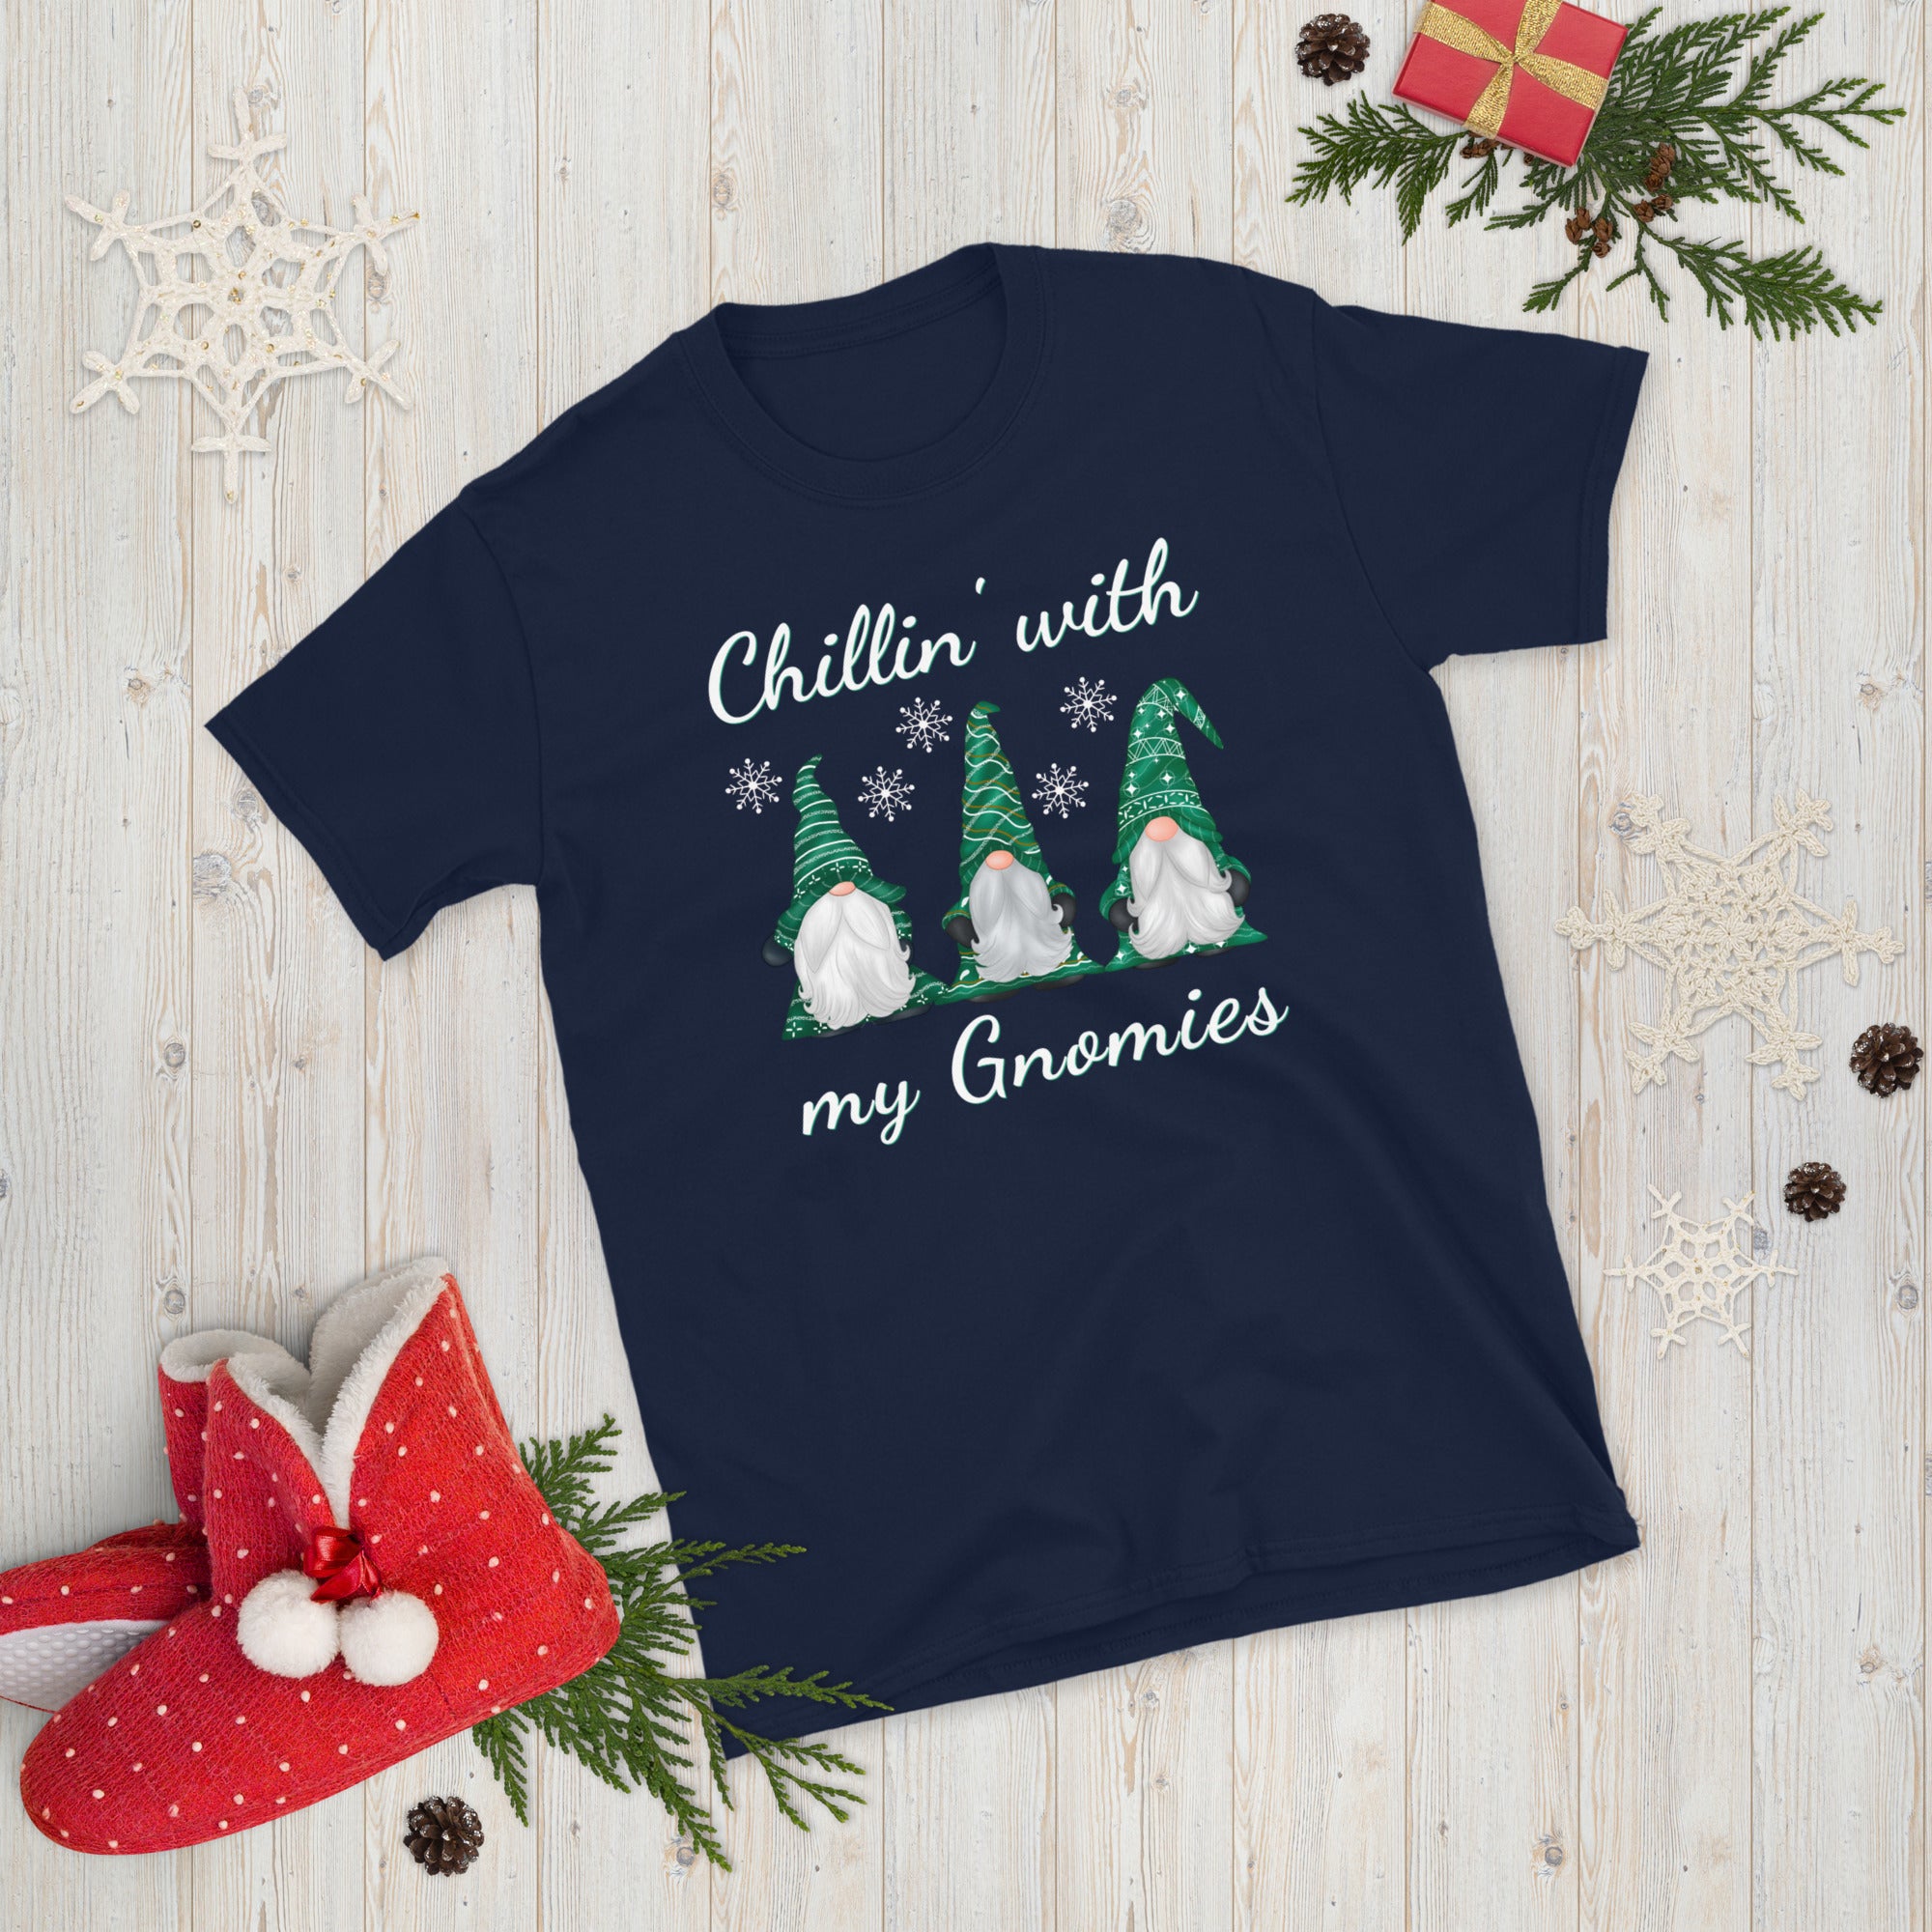 Chillin With My Gnomies Shirt, Funny Chilling Gnomes Shirt, Gnomes Christmas Shirt, Gnome Shirt, Cute Gnome Shirt, Winter Gnome Shirt